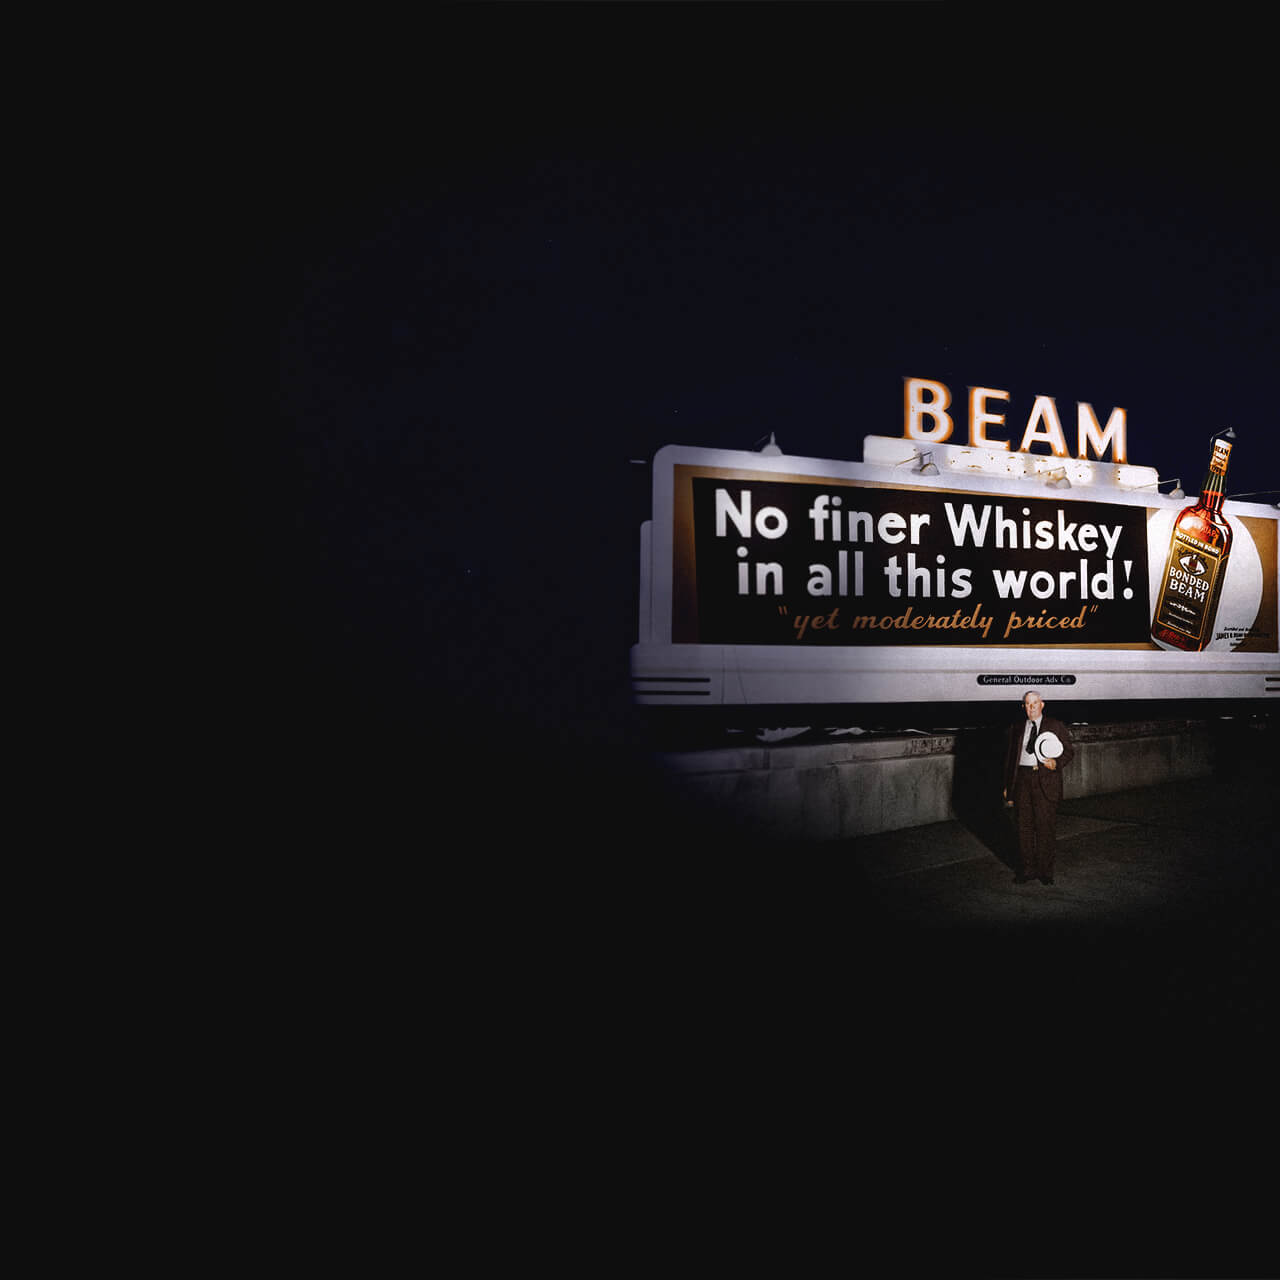 James B. Beam standing in front of a billboard.